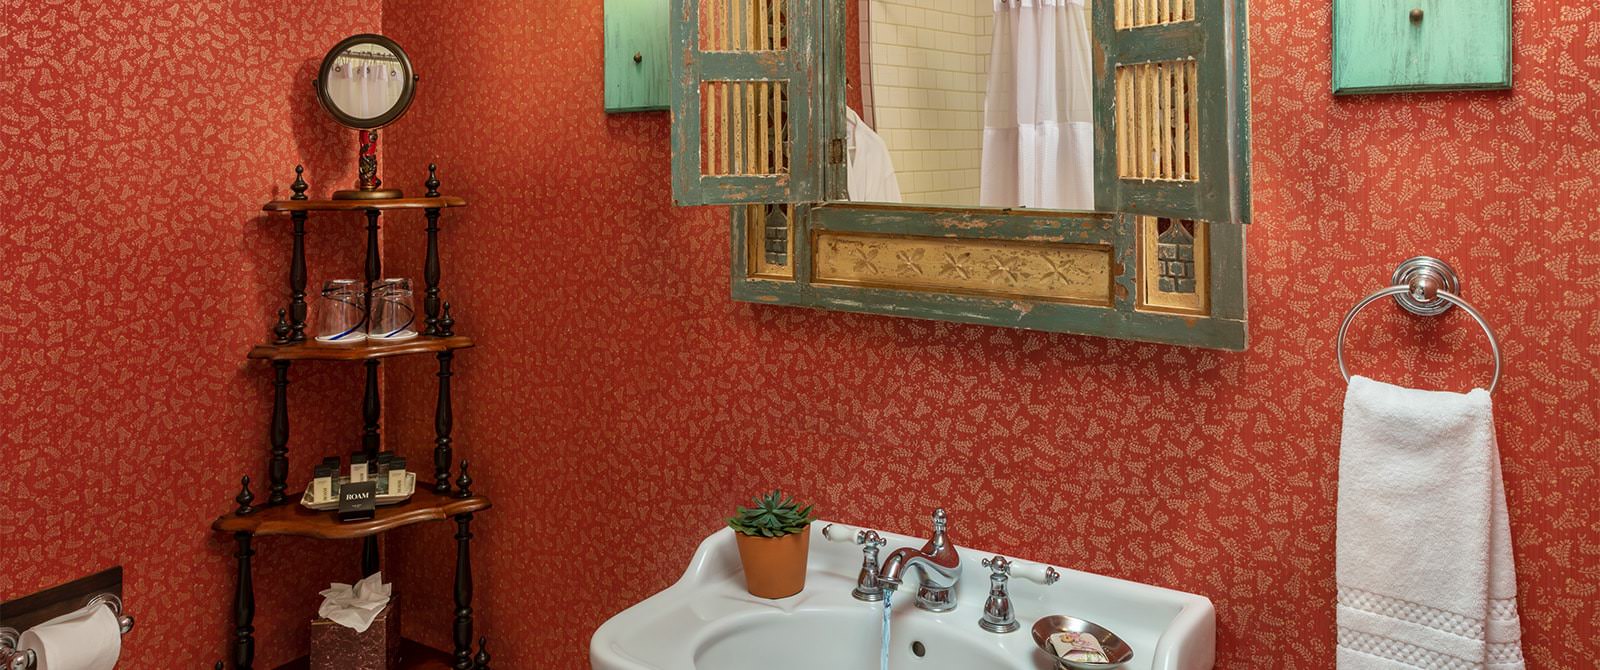 Bathroom with wallpaper, white sink, wooden mirror, and wooden corner shelving unit